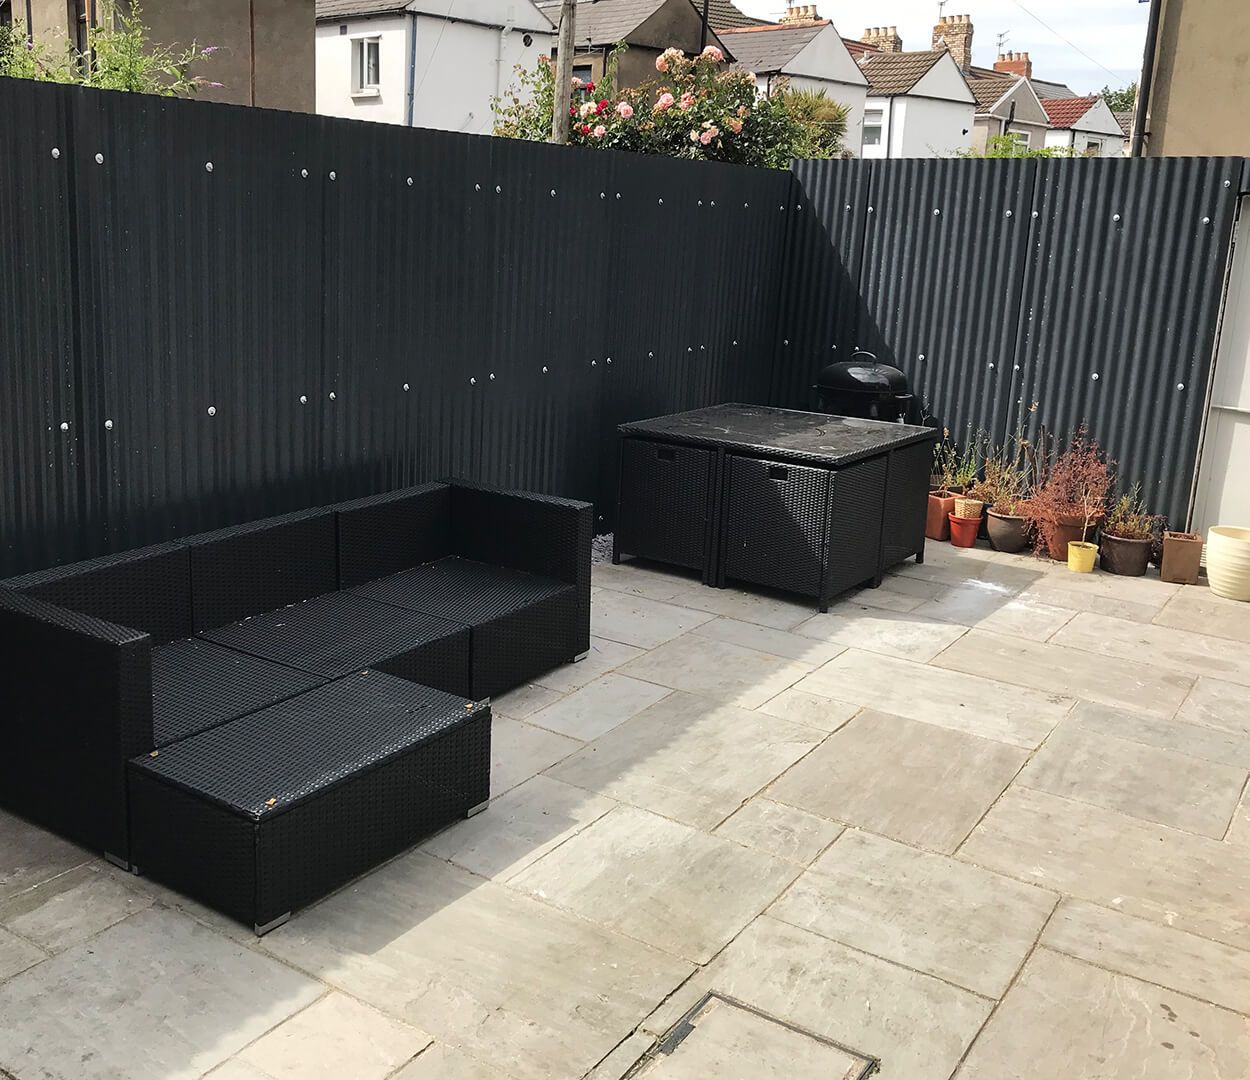 Black Corrugated Cladding Sheets in garden